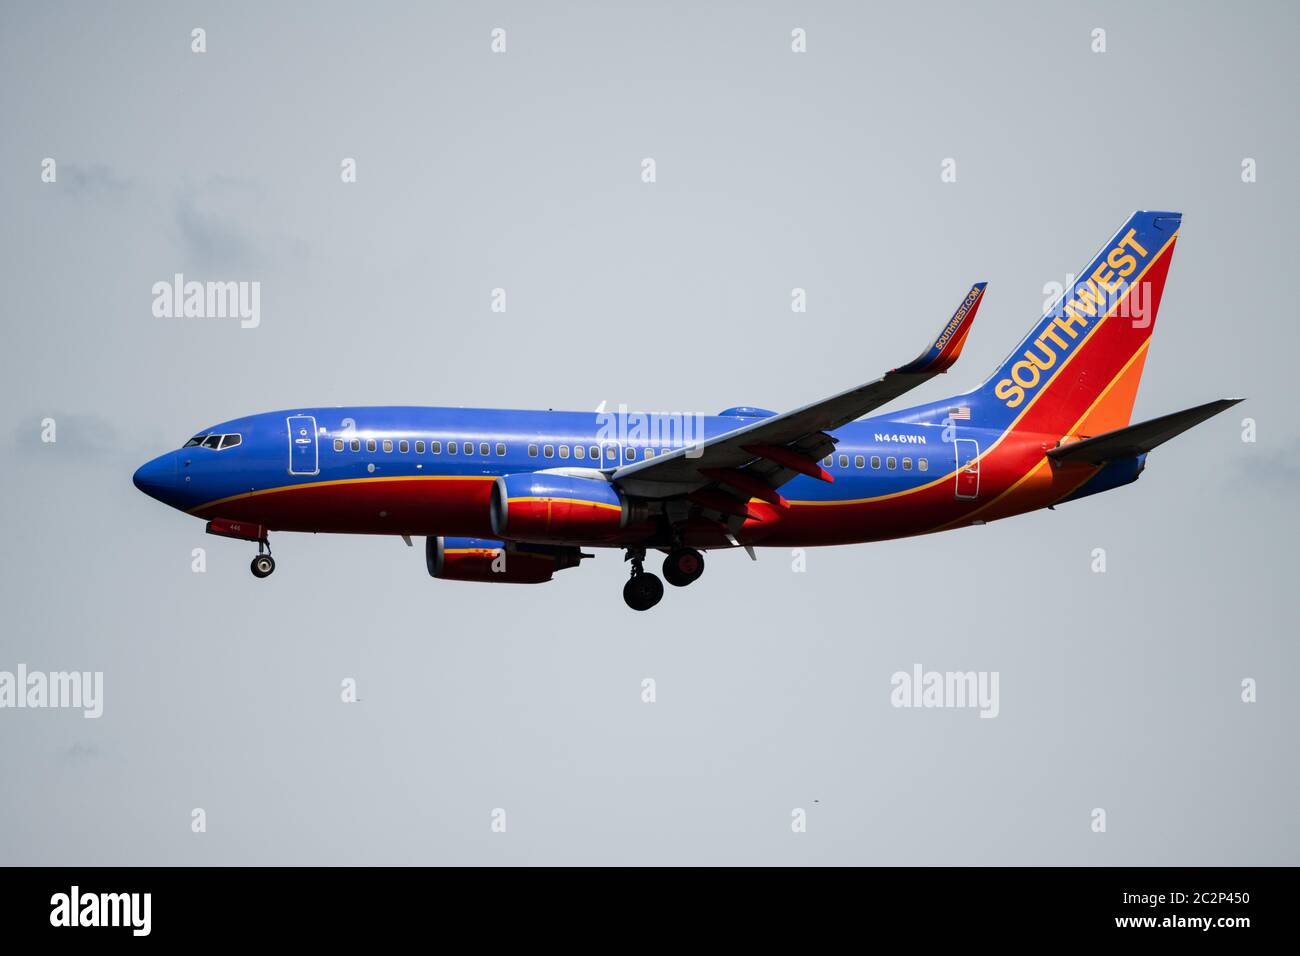 A Southwest Airlines Boeing 737-7H4 landing at Ronald Reagan Washington National Airport (DCA). Stock Photo